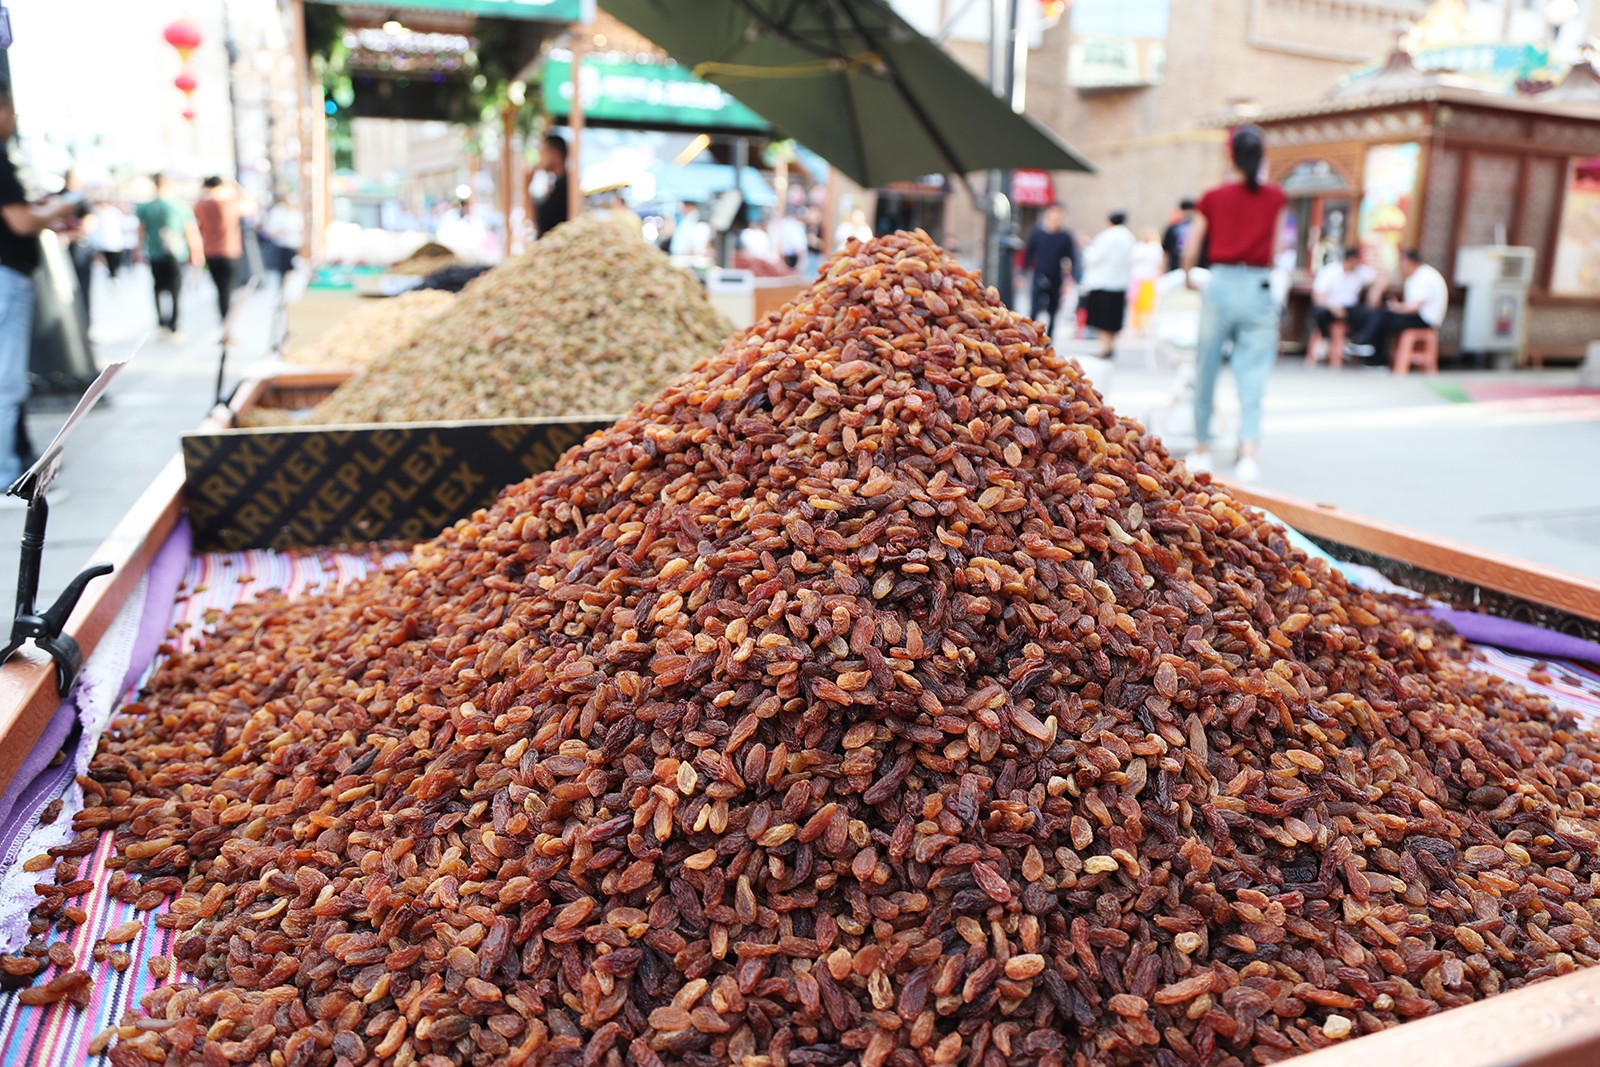 Mounds of raisins are displayed for sale at the Xinjiang International Grand Bazaar in Urumqi. /CGTN